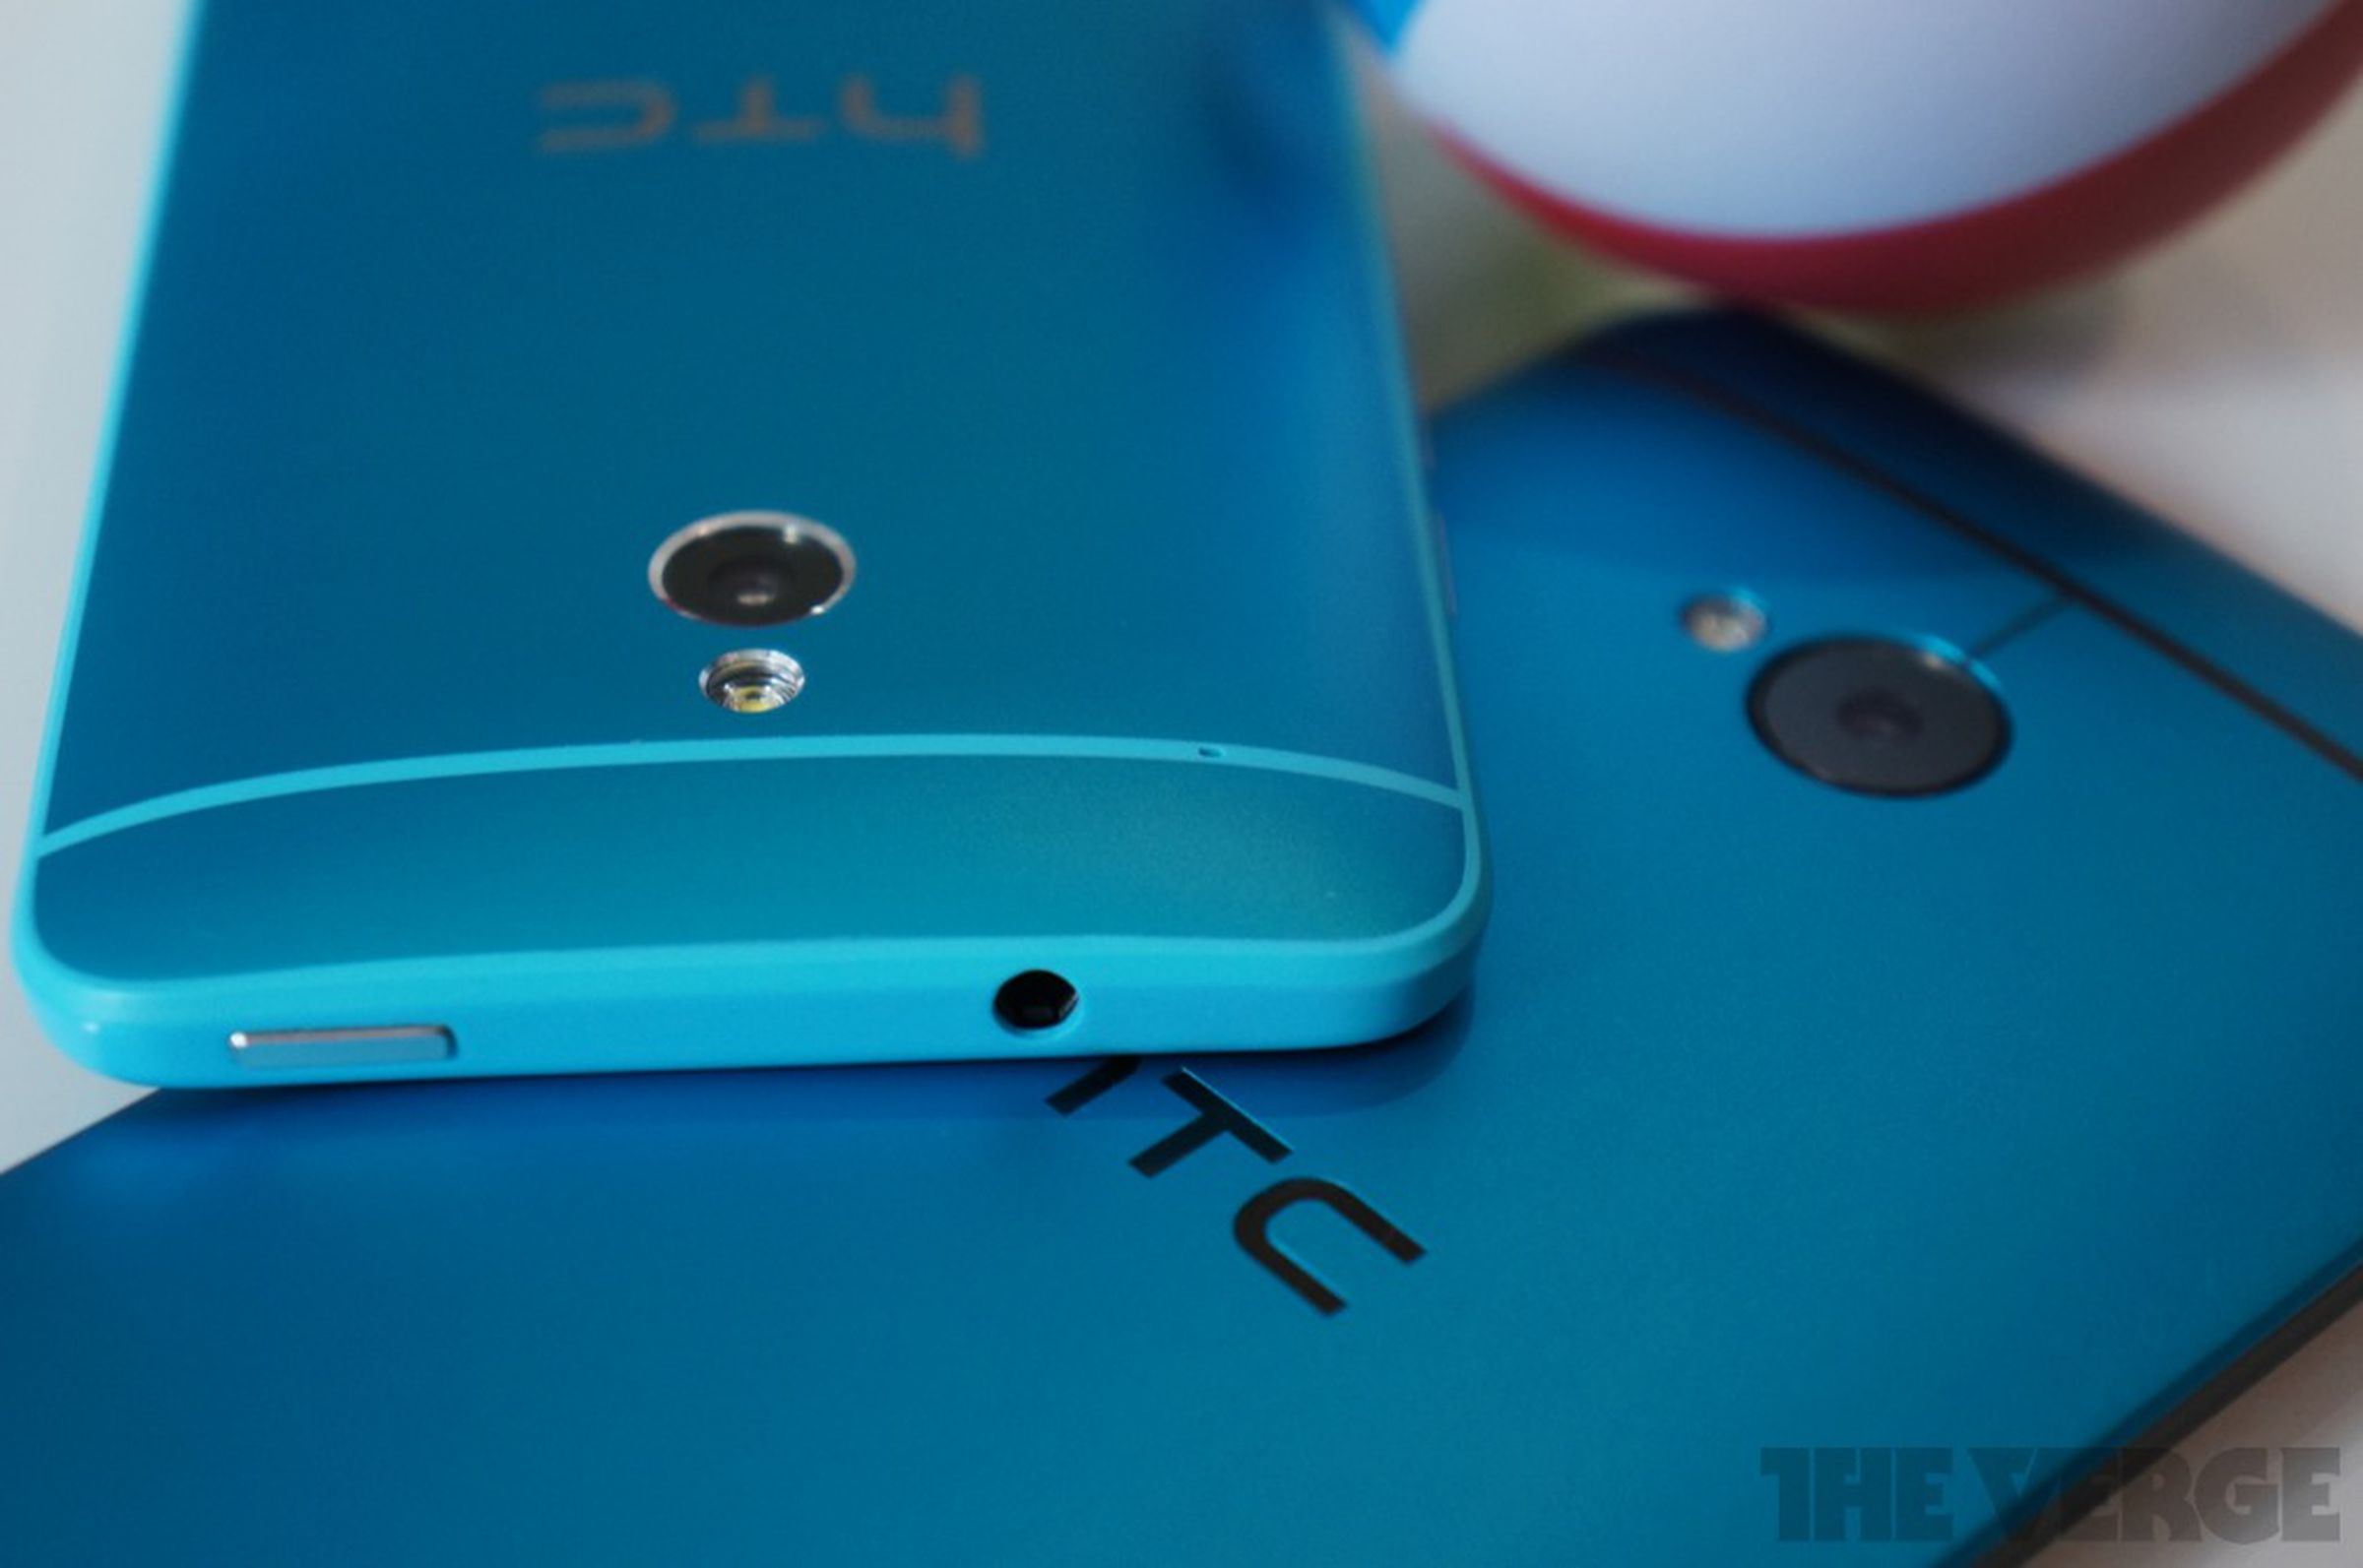 HTC One and One mini in Vivid Blue